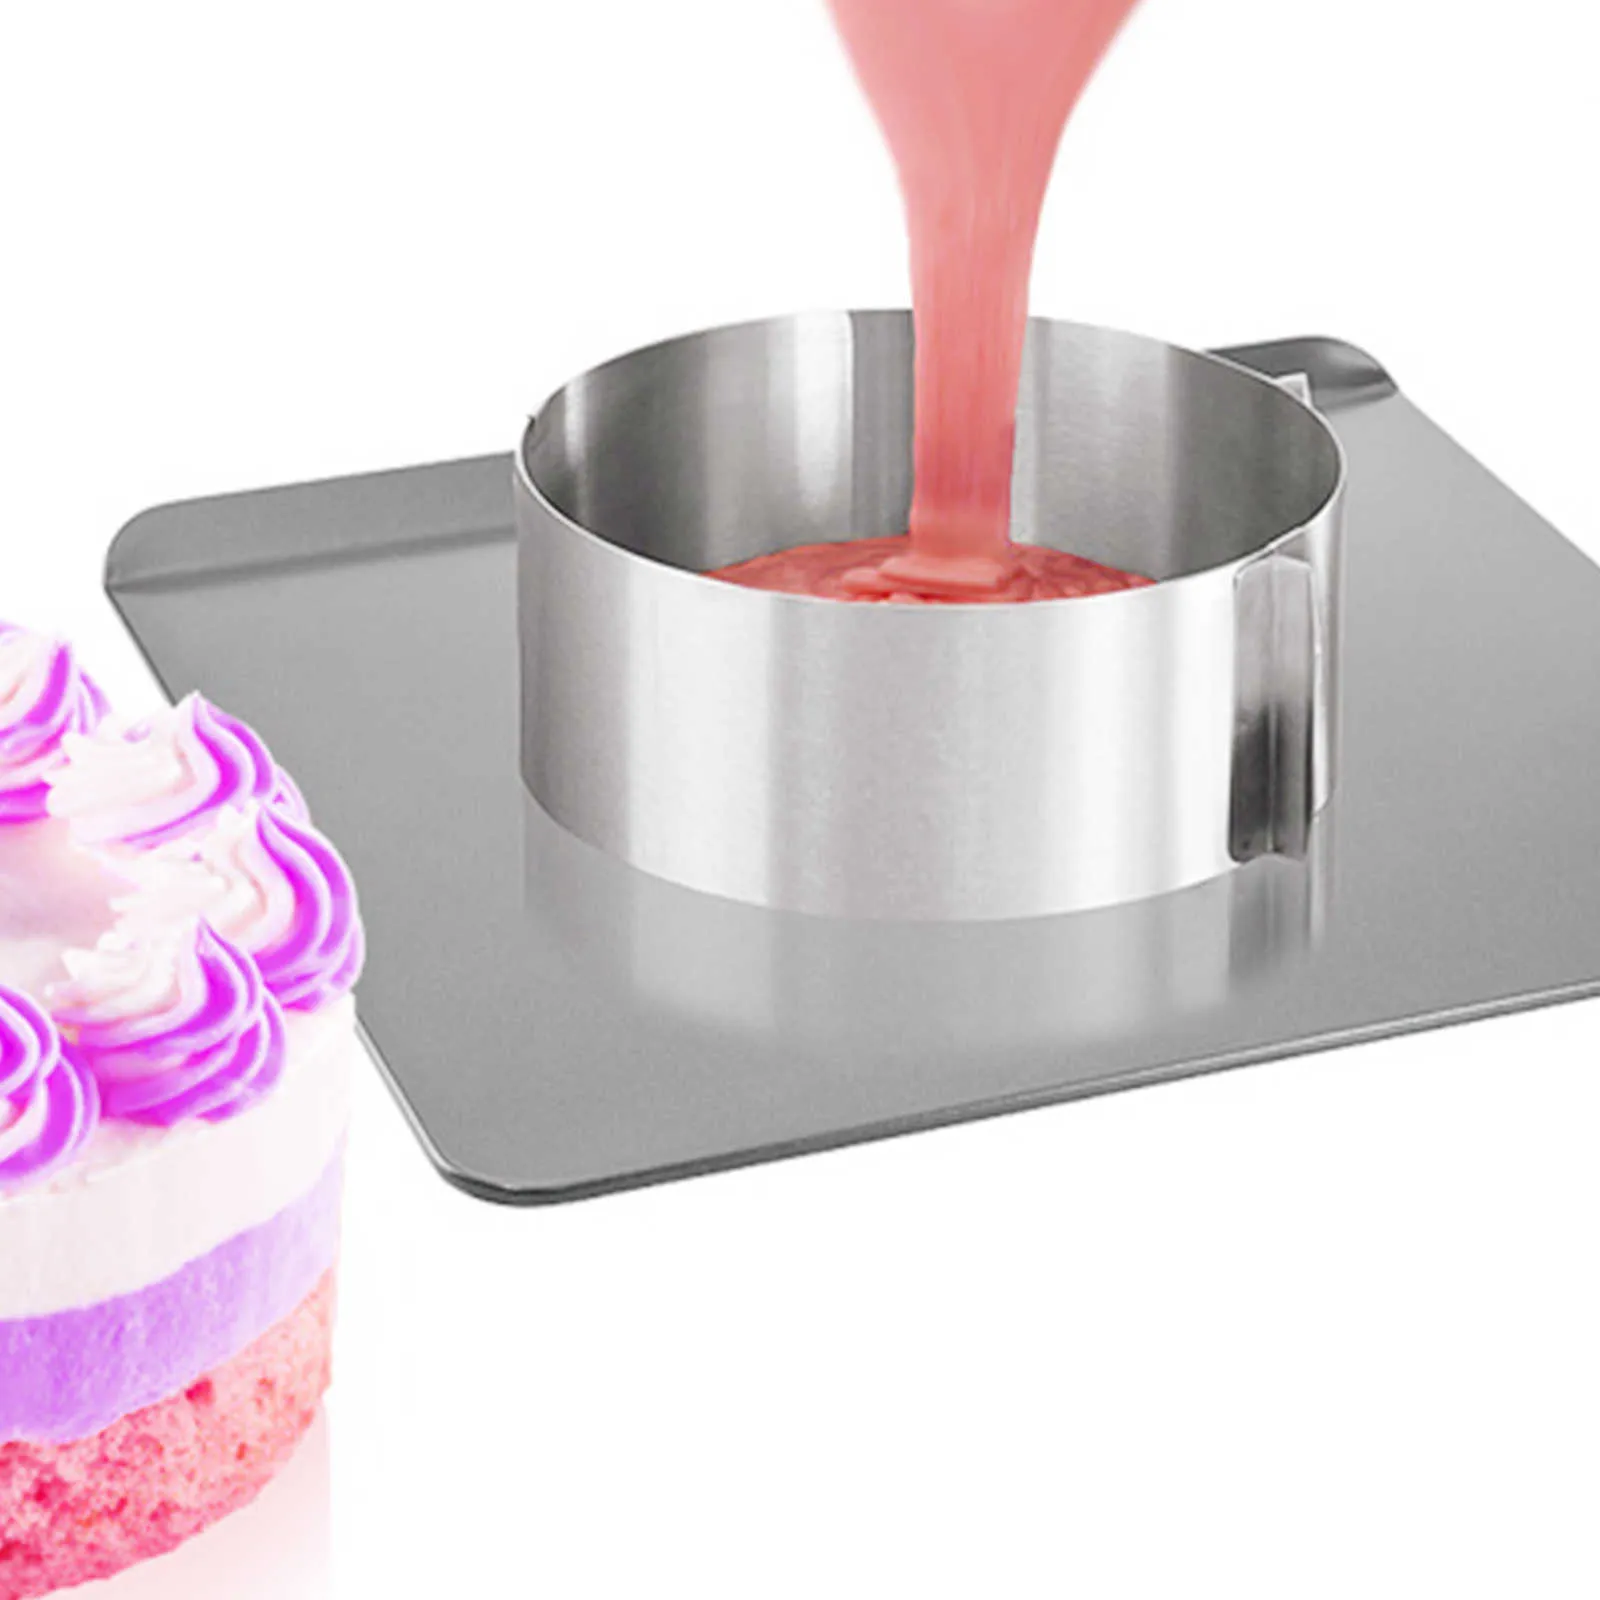 Round Mousse Ring Cake Mold Adjustable 3D Cake Mould Stainless Steel Baking Moulds Kitchen Mousse Cake Decorating Tools 210702